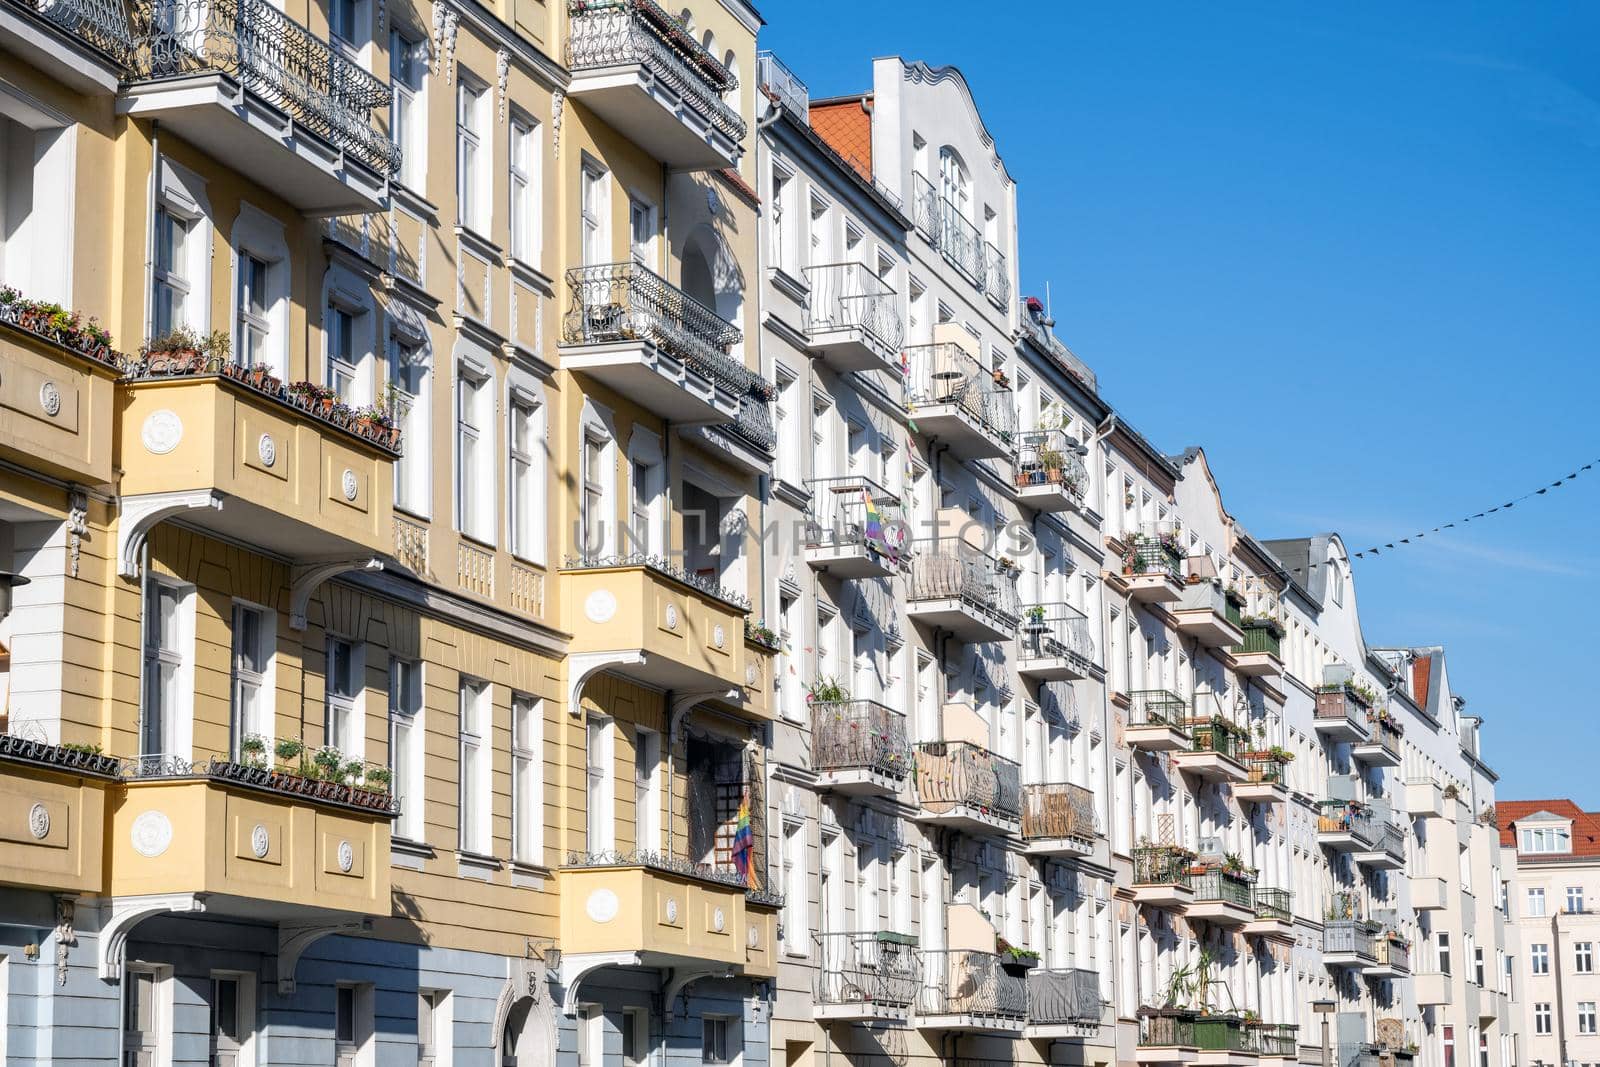 Beautiful renovated old apartment buildings by elxeneize